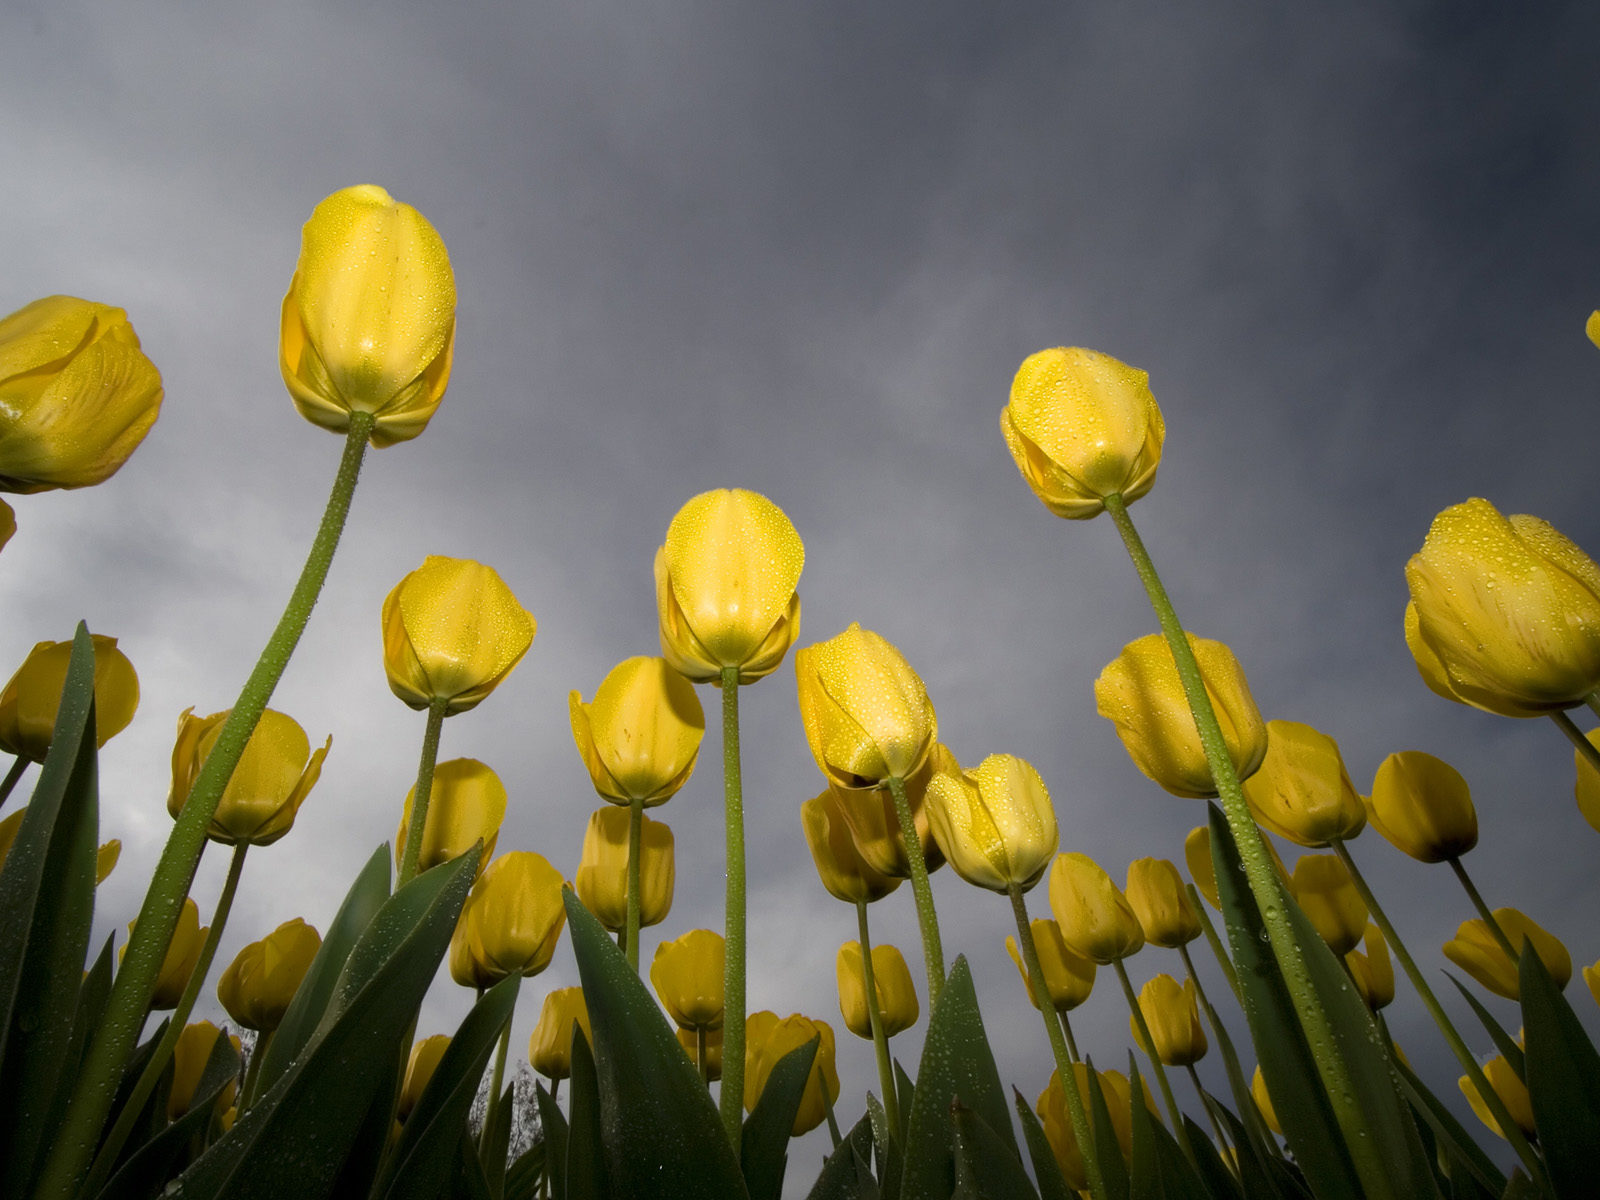 Low Angle Tulips Best Background Full HD1920x1080p, 1280x720p, – HD Wallpapers Backgrounds Desktop, iphone & Android Free Download